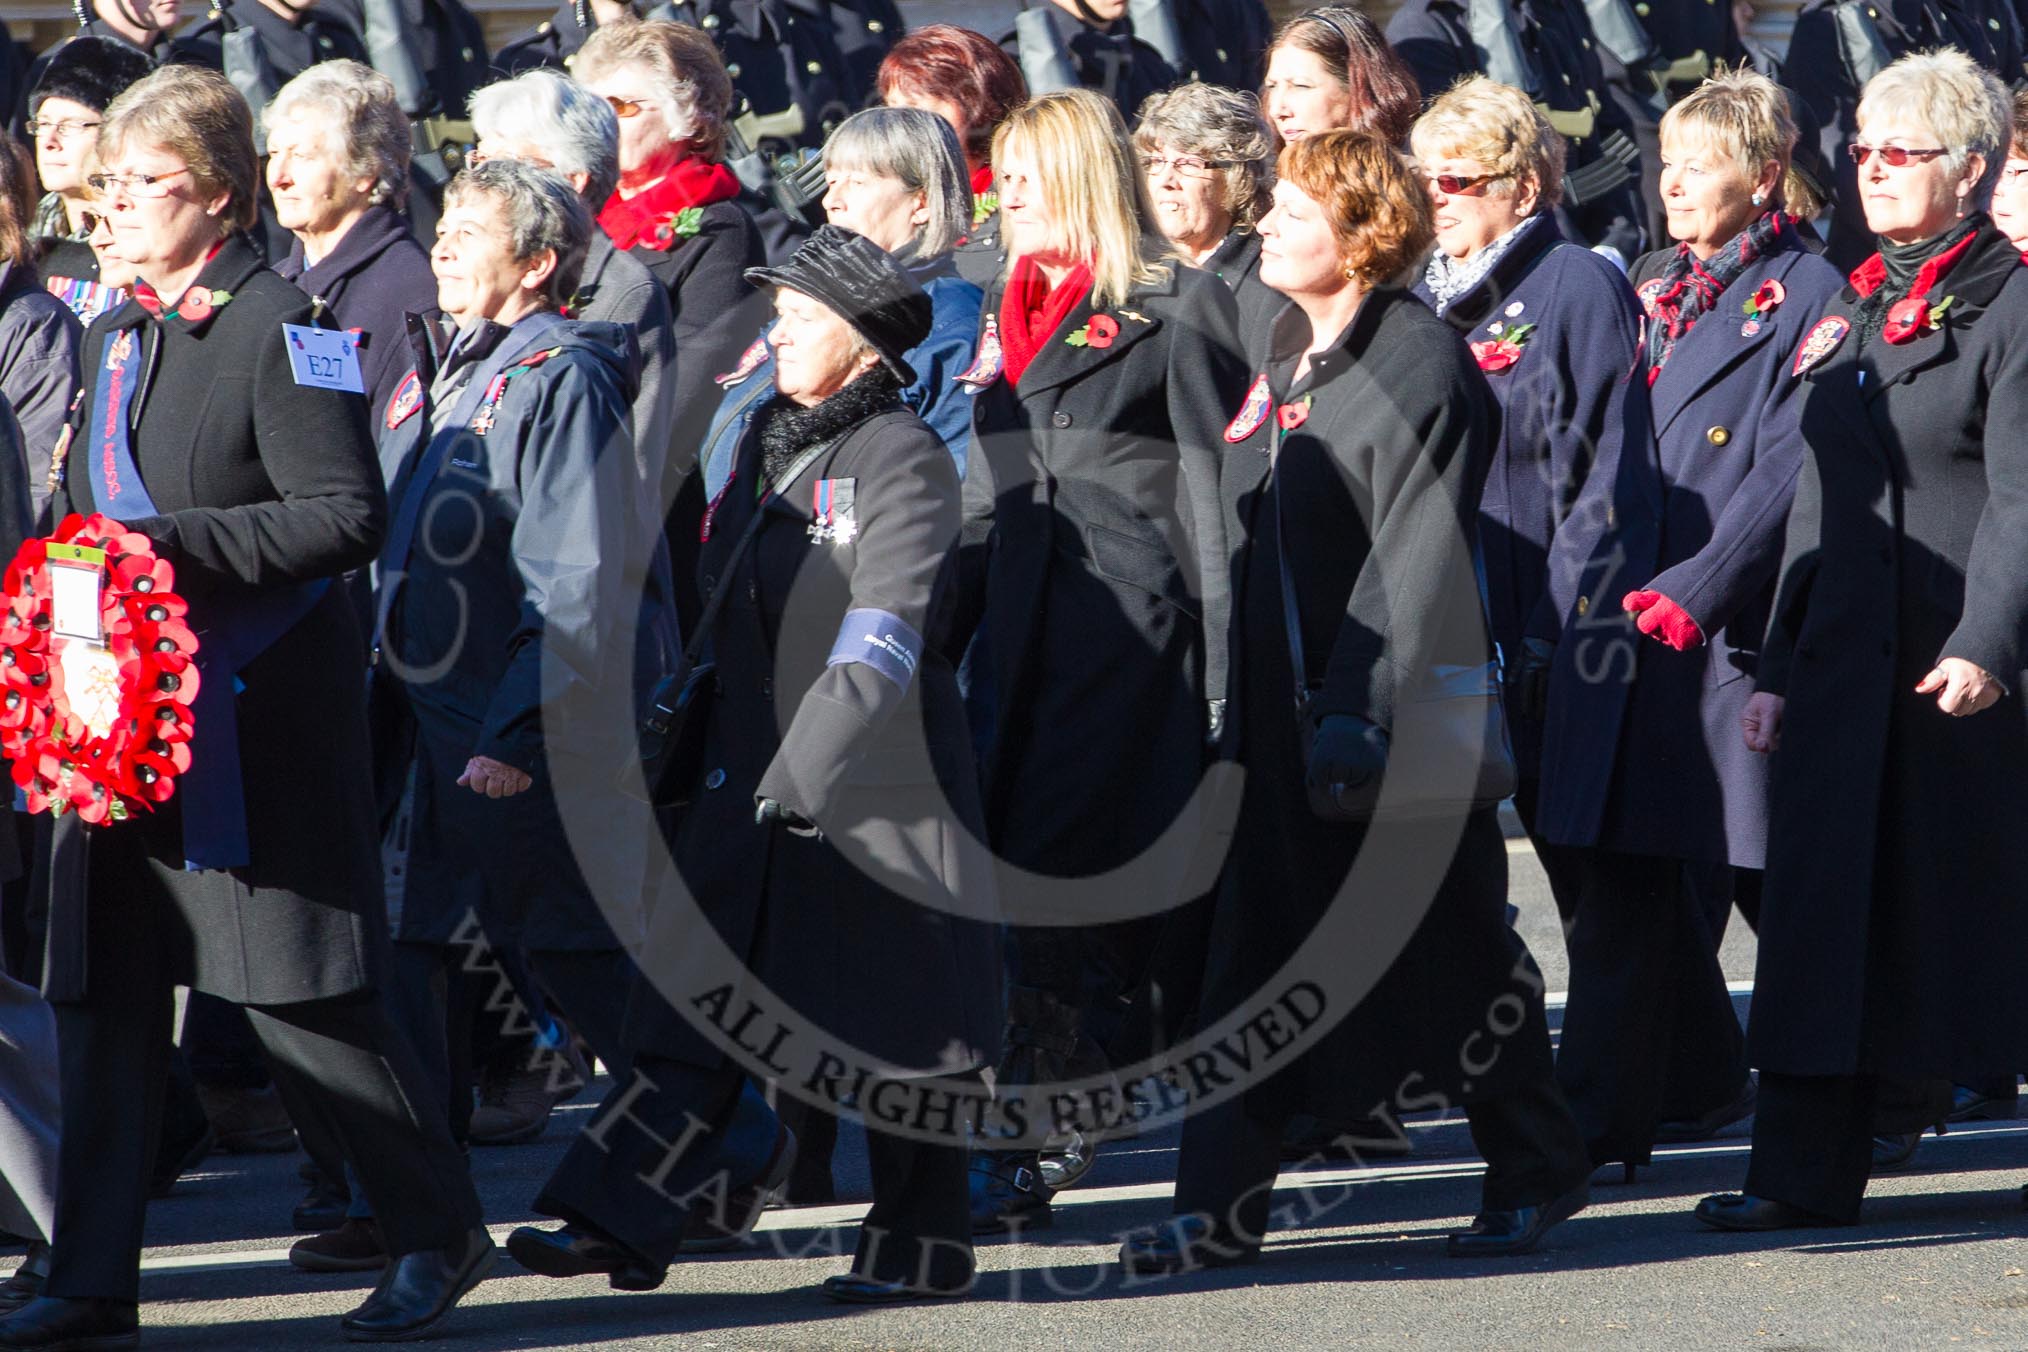 Remembrance Sunday 2012 Cenotaph March Past: Group E27 - Queen Alexandra's Royal Naval Nursing Service..
Whitehall, Cenotaph,
London SW1,

United Kingdom,
on 11 November 2012 at 11:41, image #196